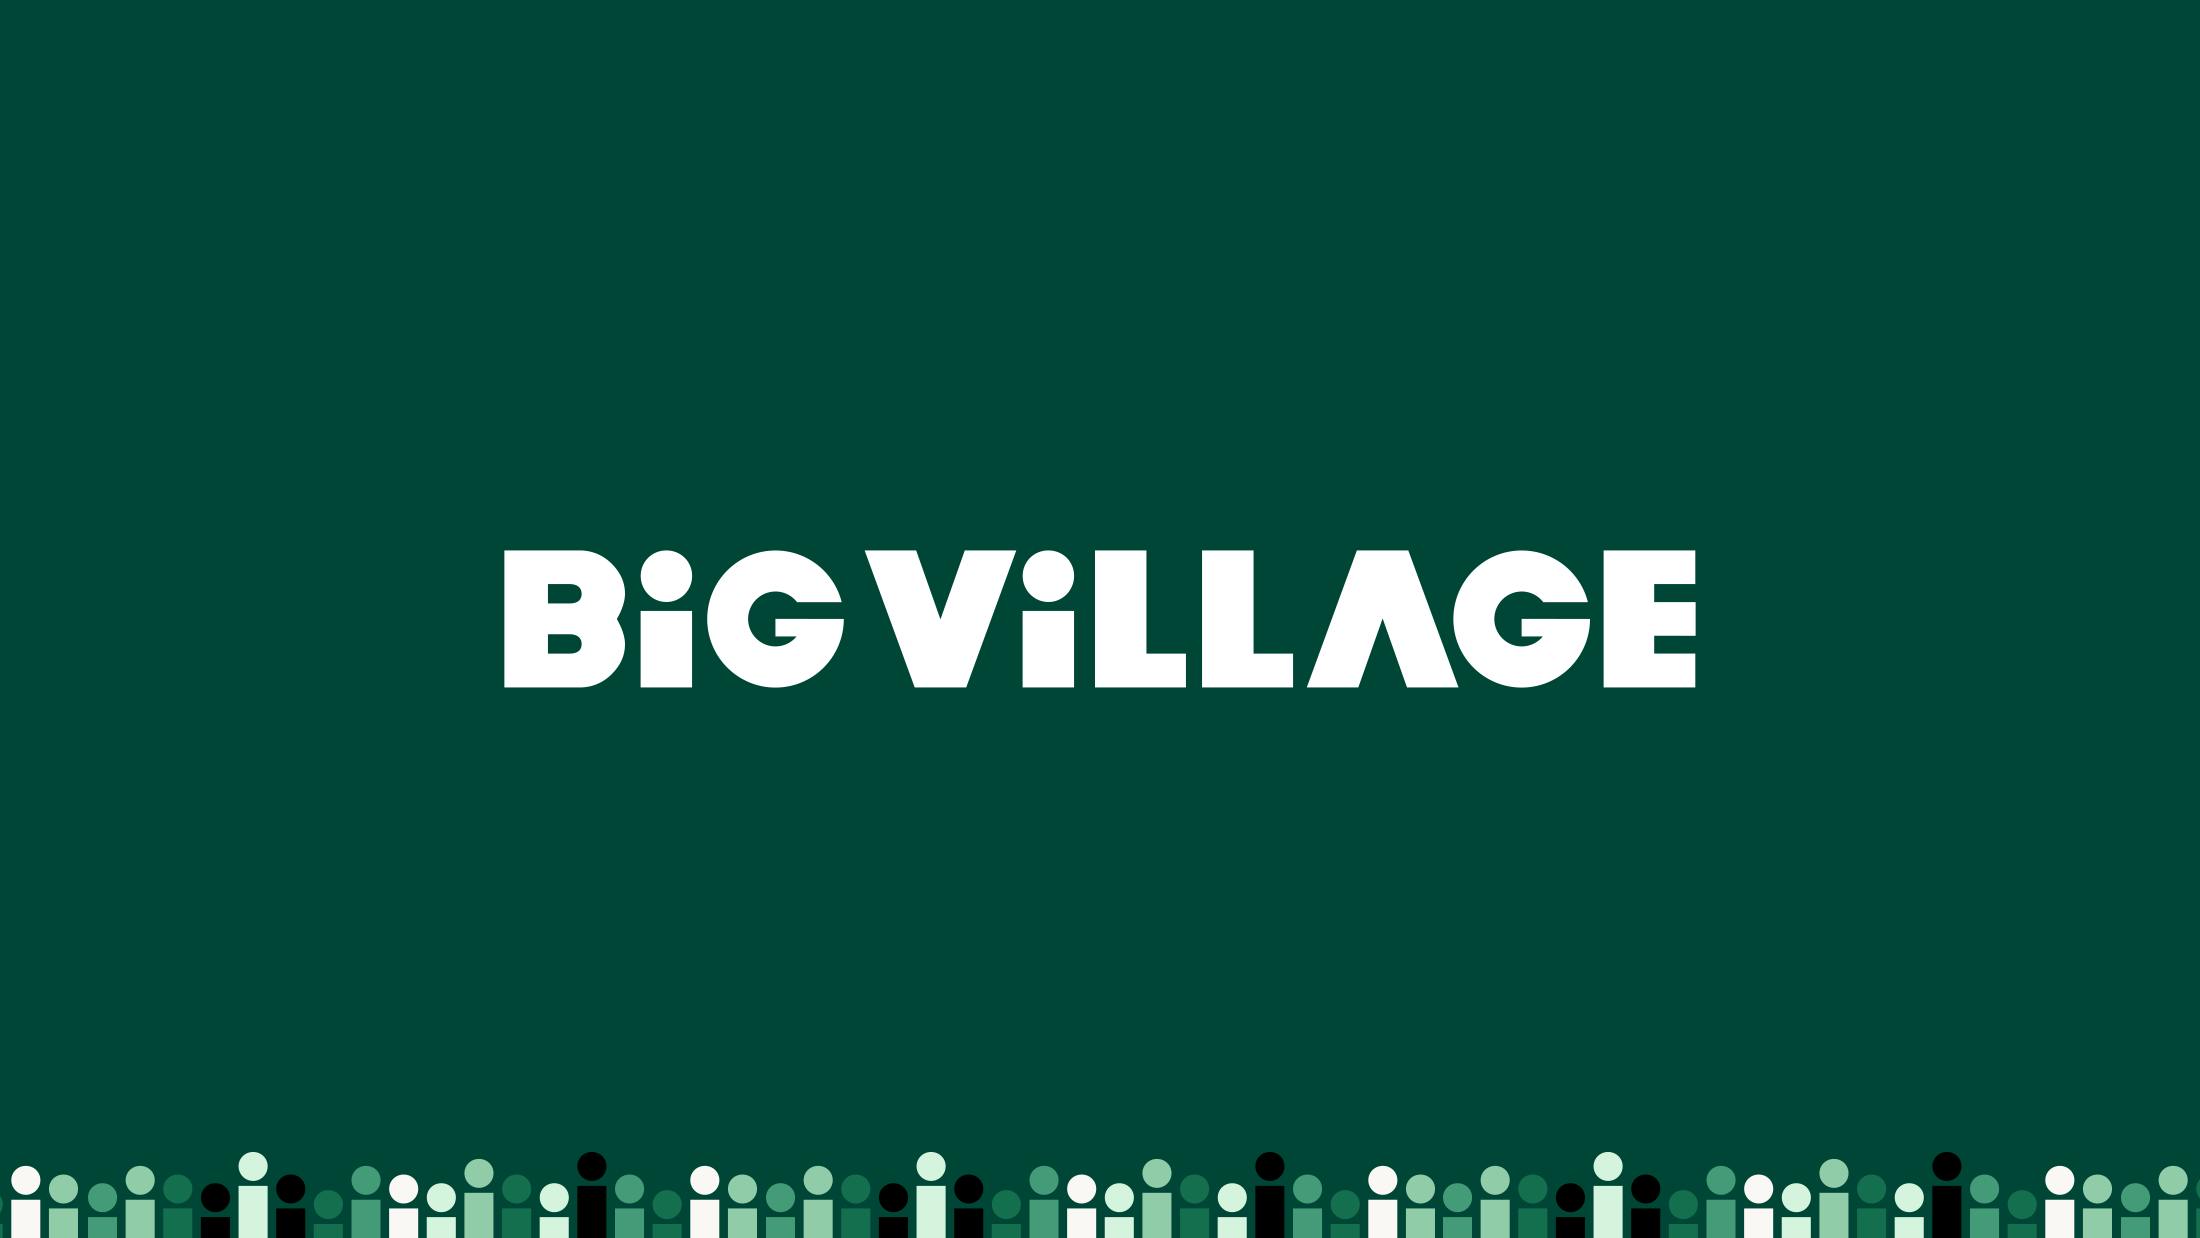 ENGINE in the US, Europe, and Australia Rebrands to Big Village